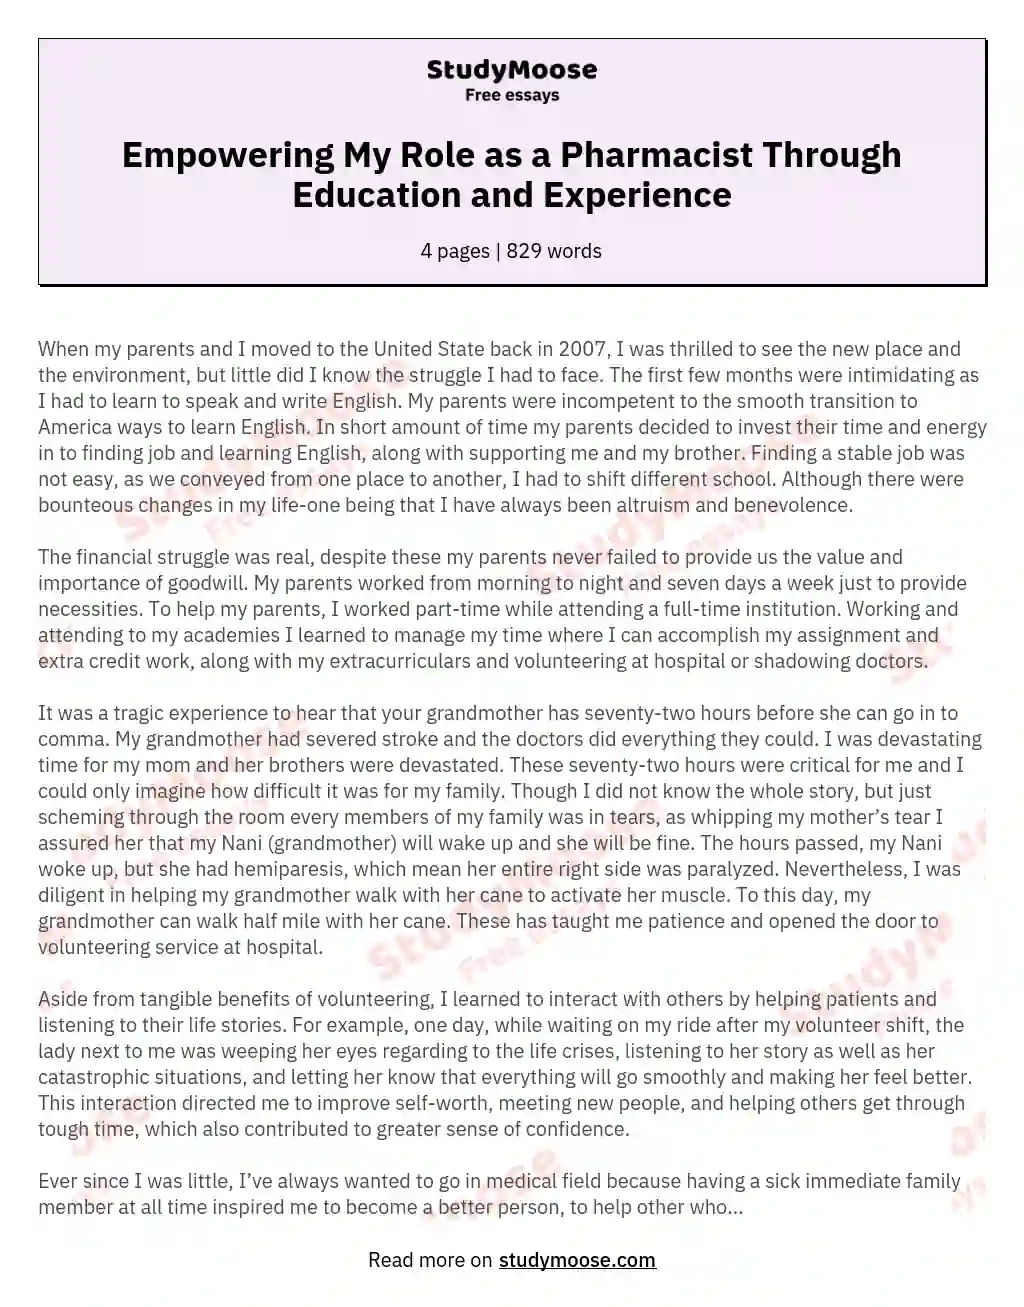 Empowering My Role as a Pharmacist Through Education and Experience essay